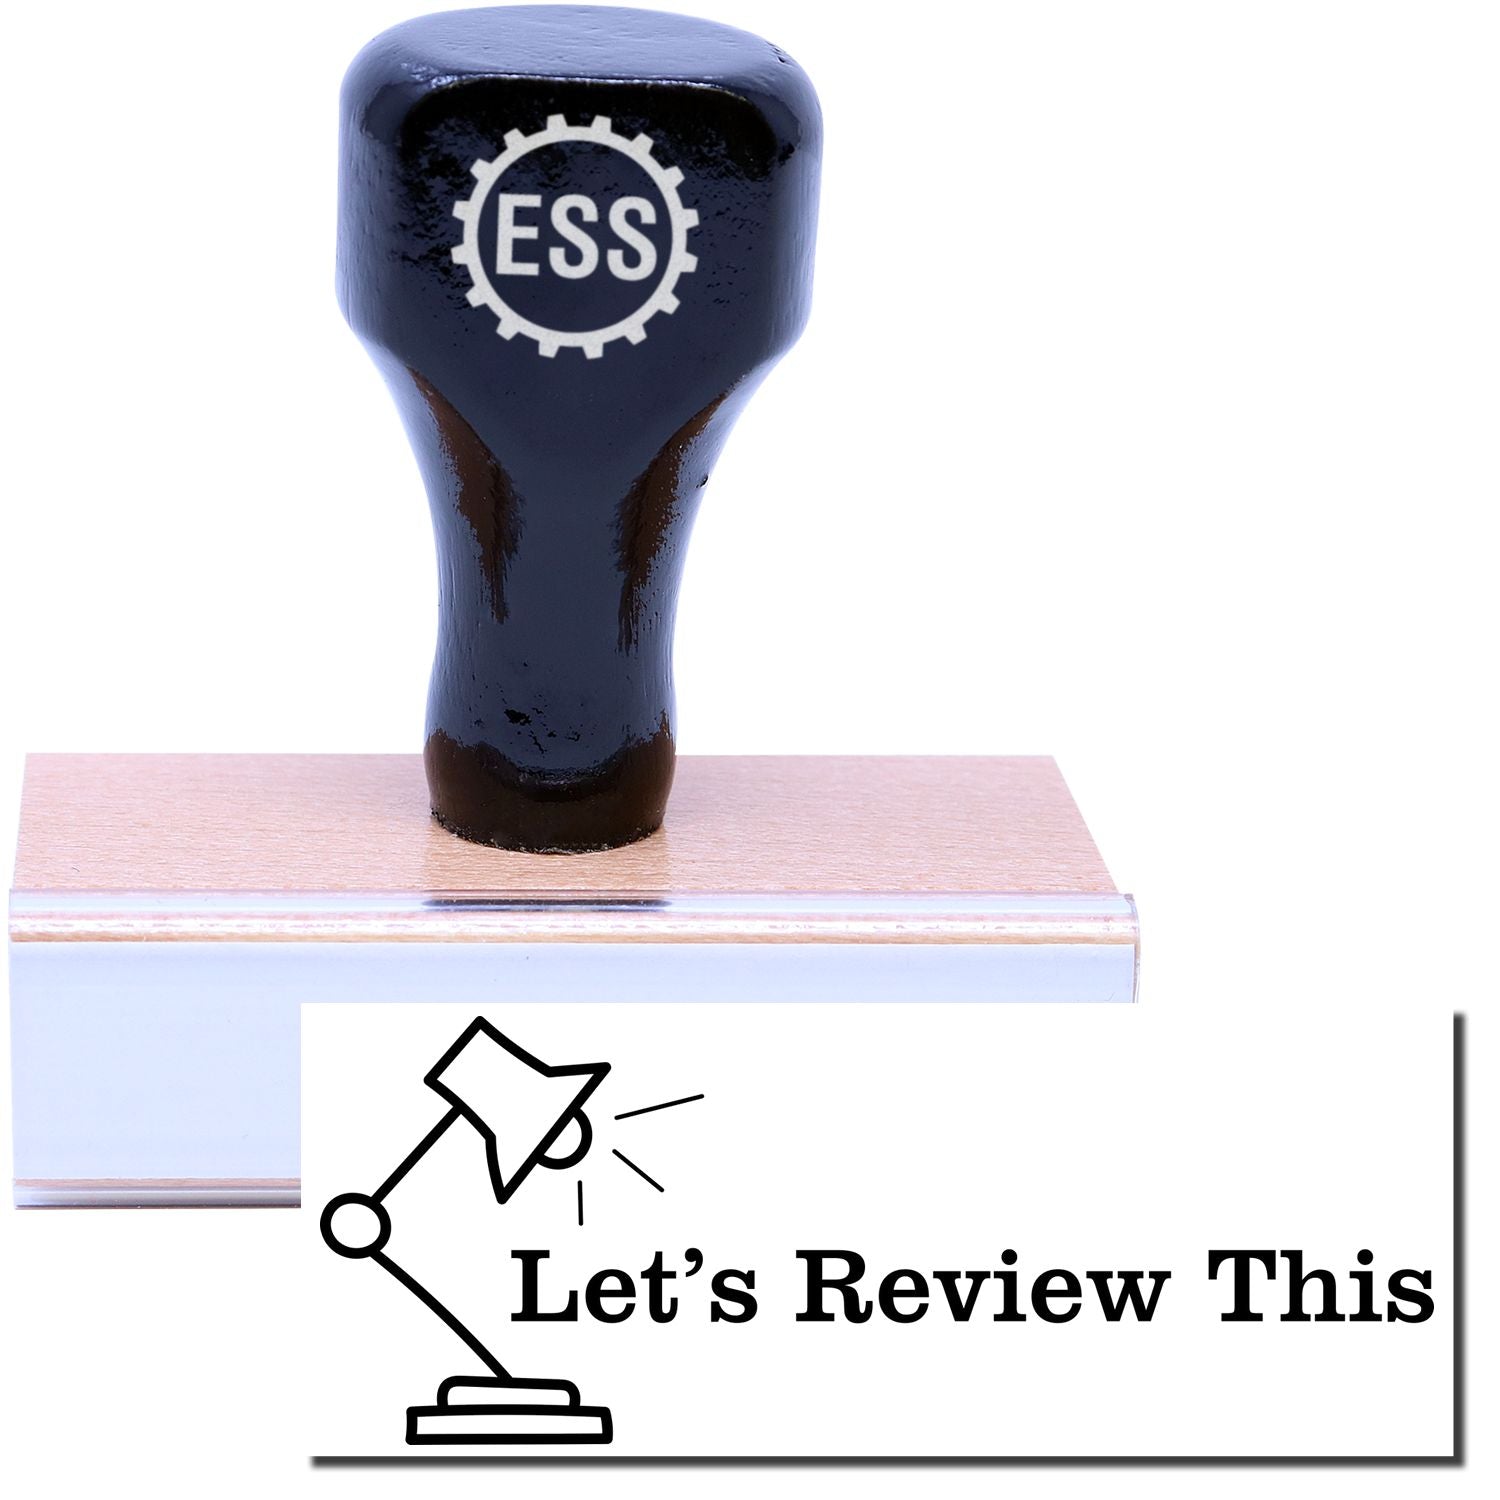 A stock office rubber stamp with a stamped image showing how the text "Let's Review This" in a large bold font with the image of a lamp is displayed after stamping.